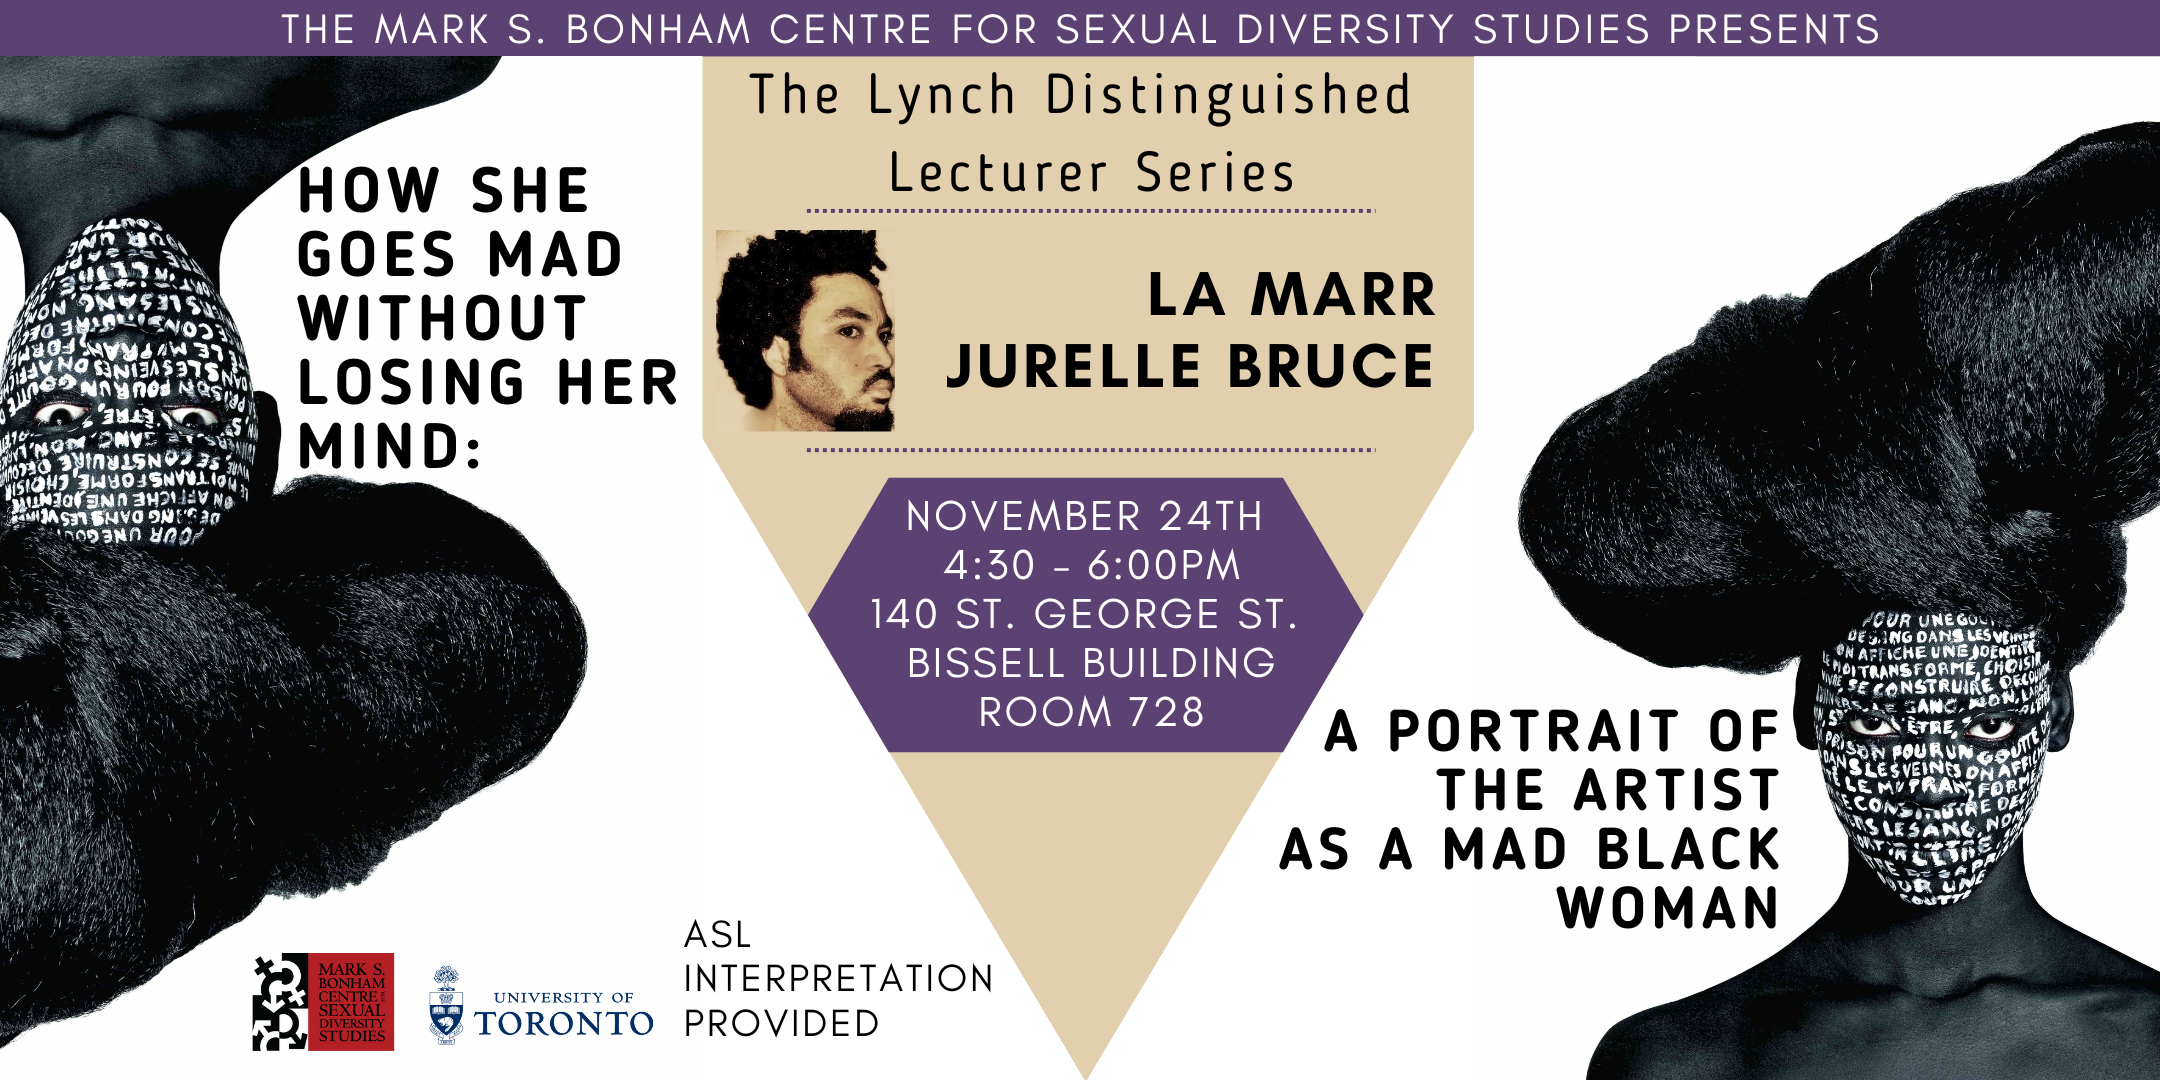 Lynch Lecture by La Marr Jurelle Bruce: How She Goes Mad without Losing Her Mind: A Portrait of the Artist as a Mad Black Woman